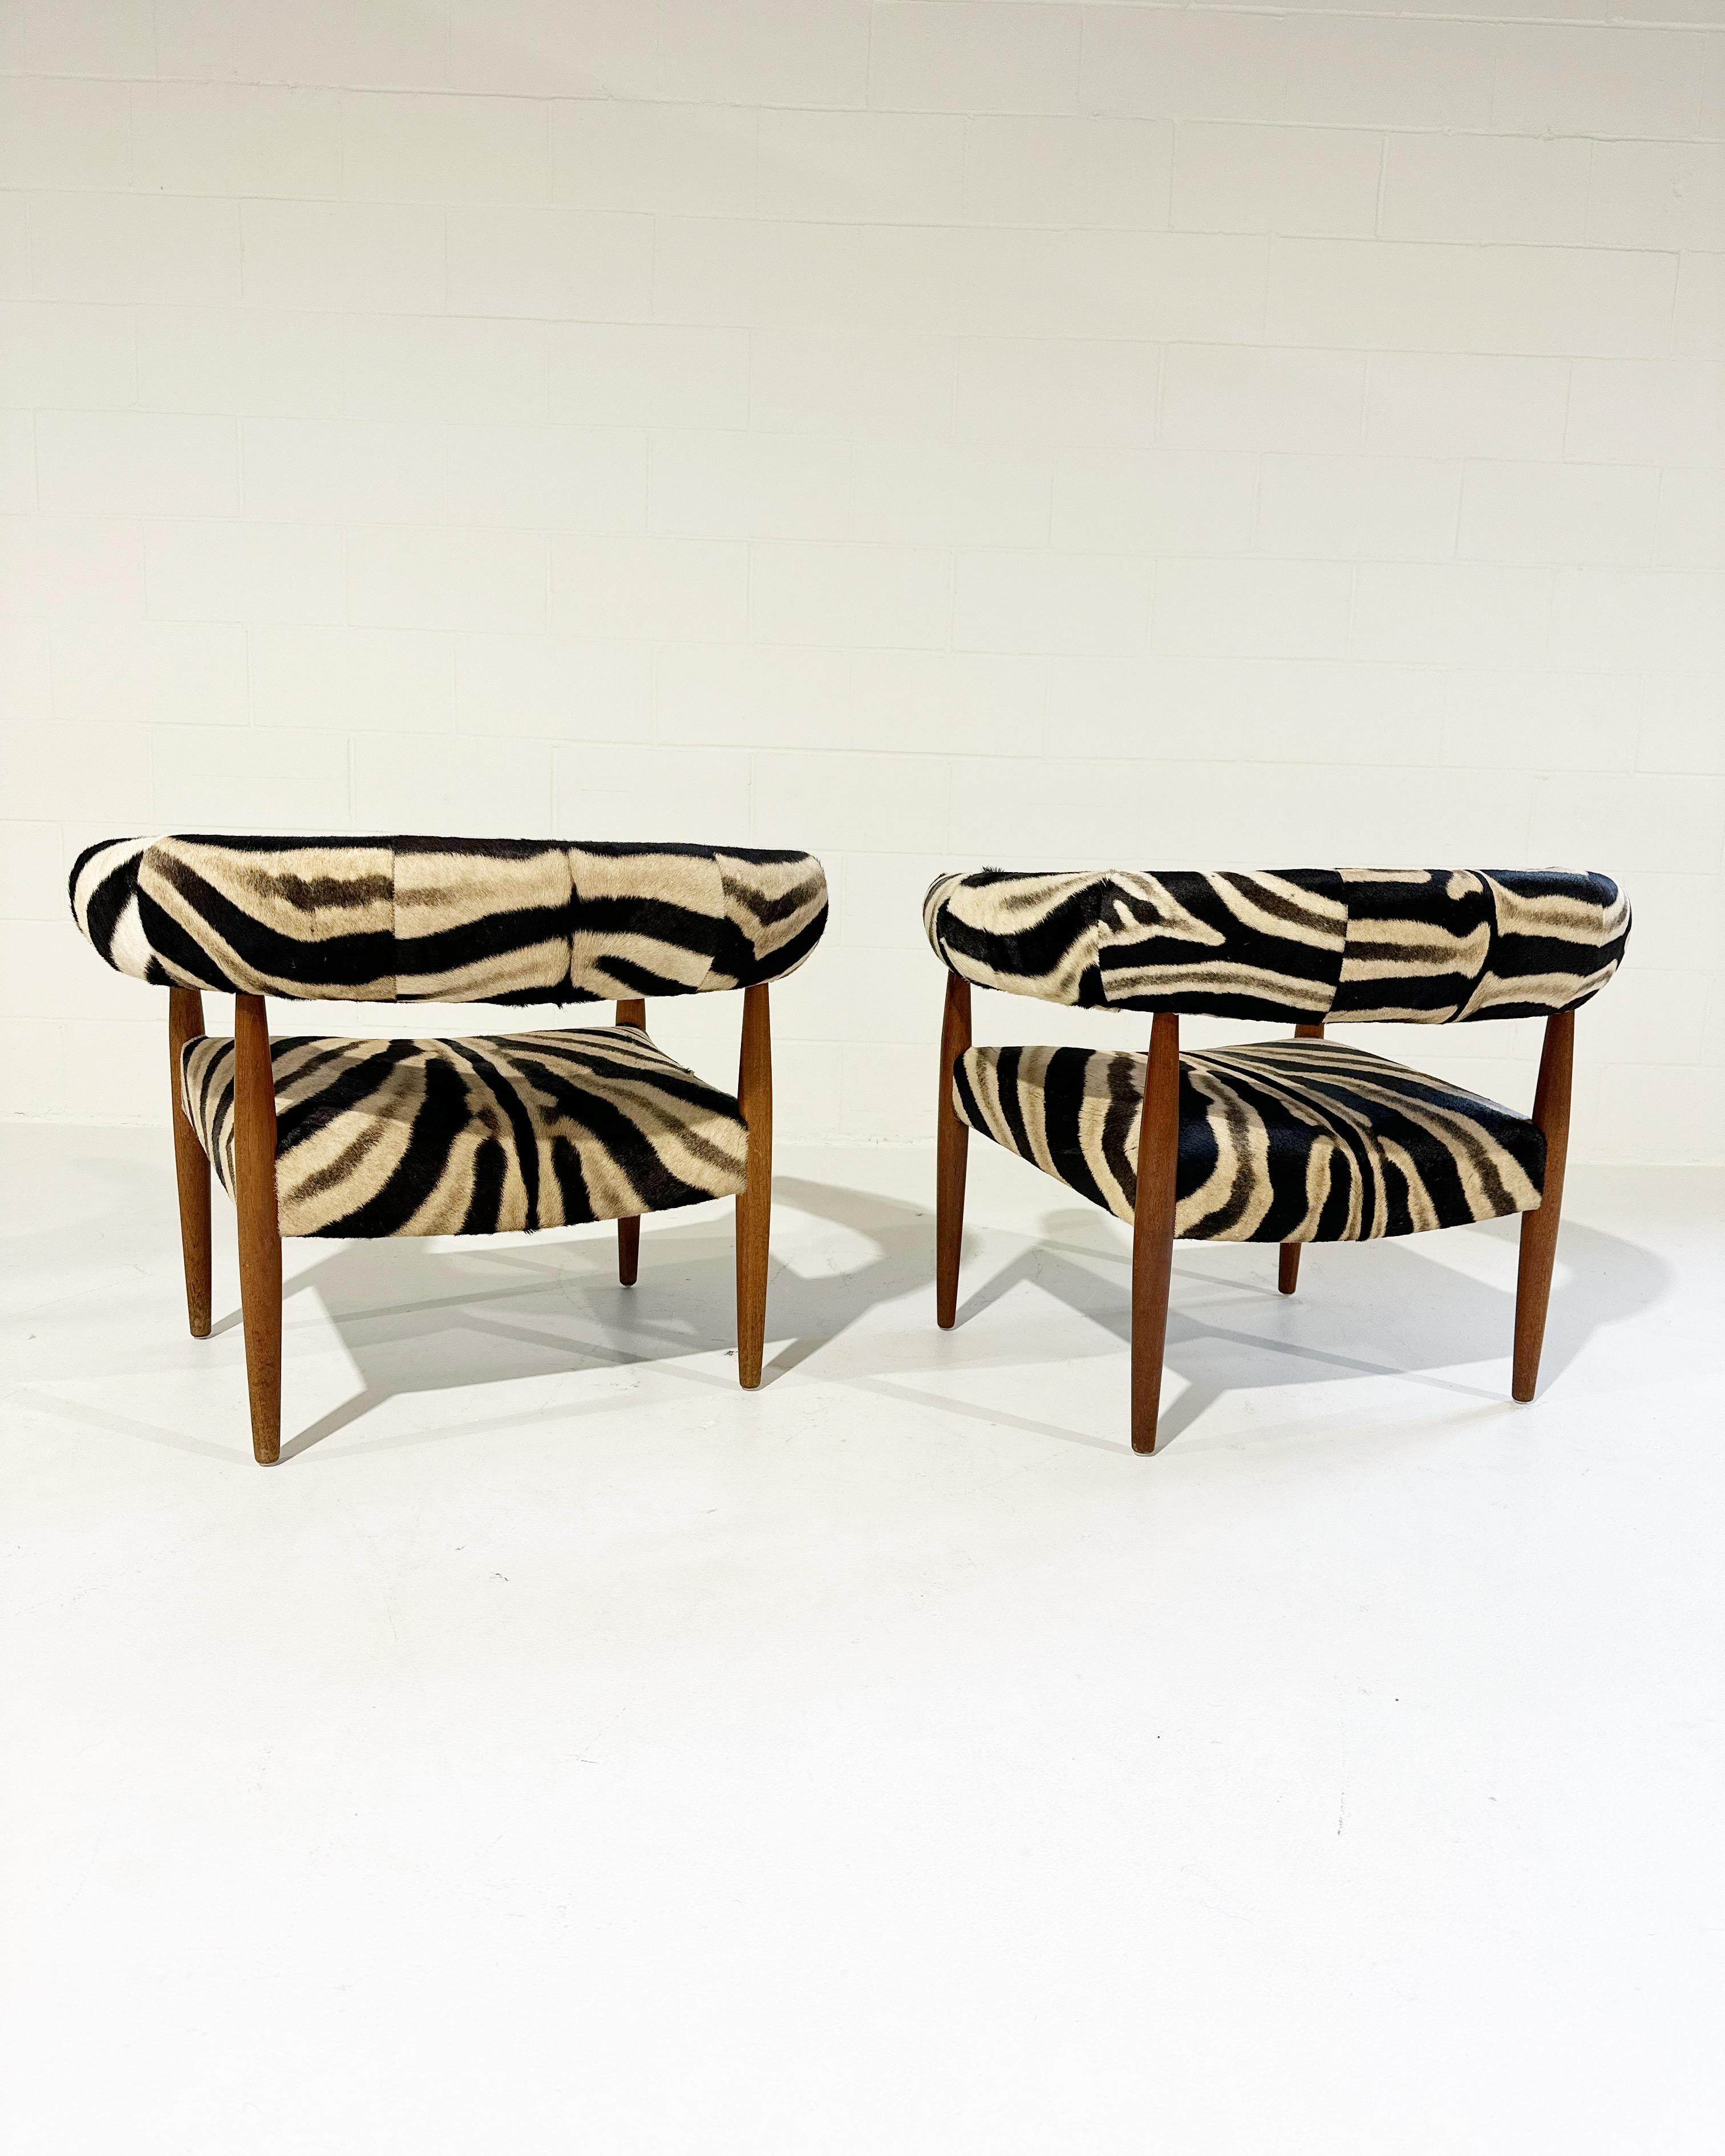 Vintage Nanna and Jorgen Ditzel Ring Lounge Chairs in Zebra Hide For Sale 4